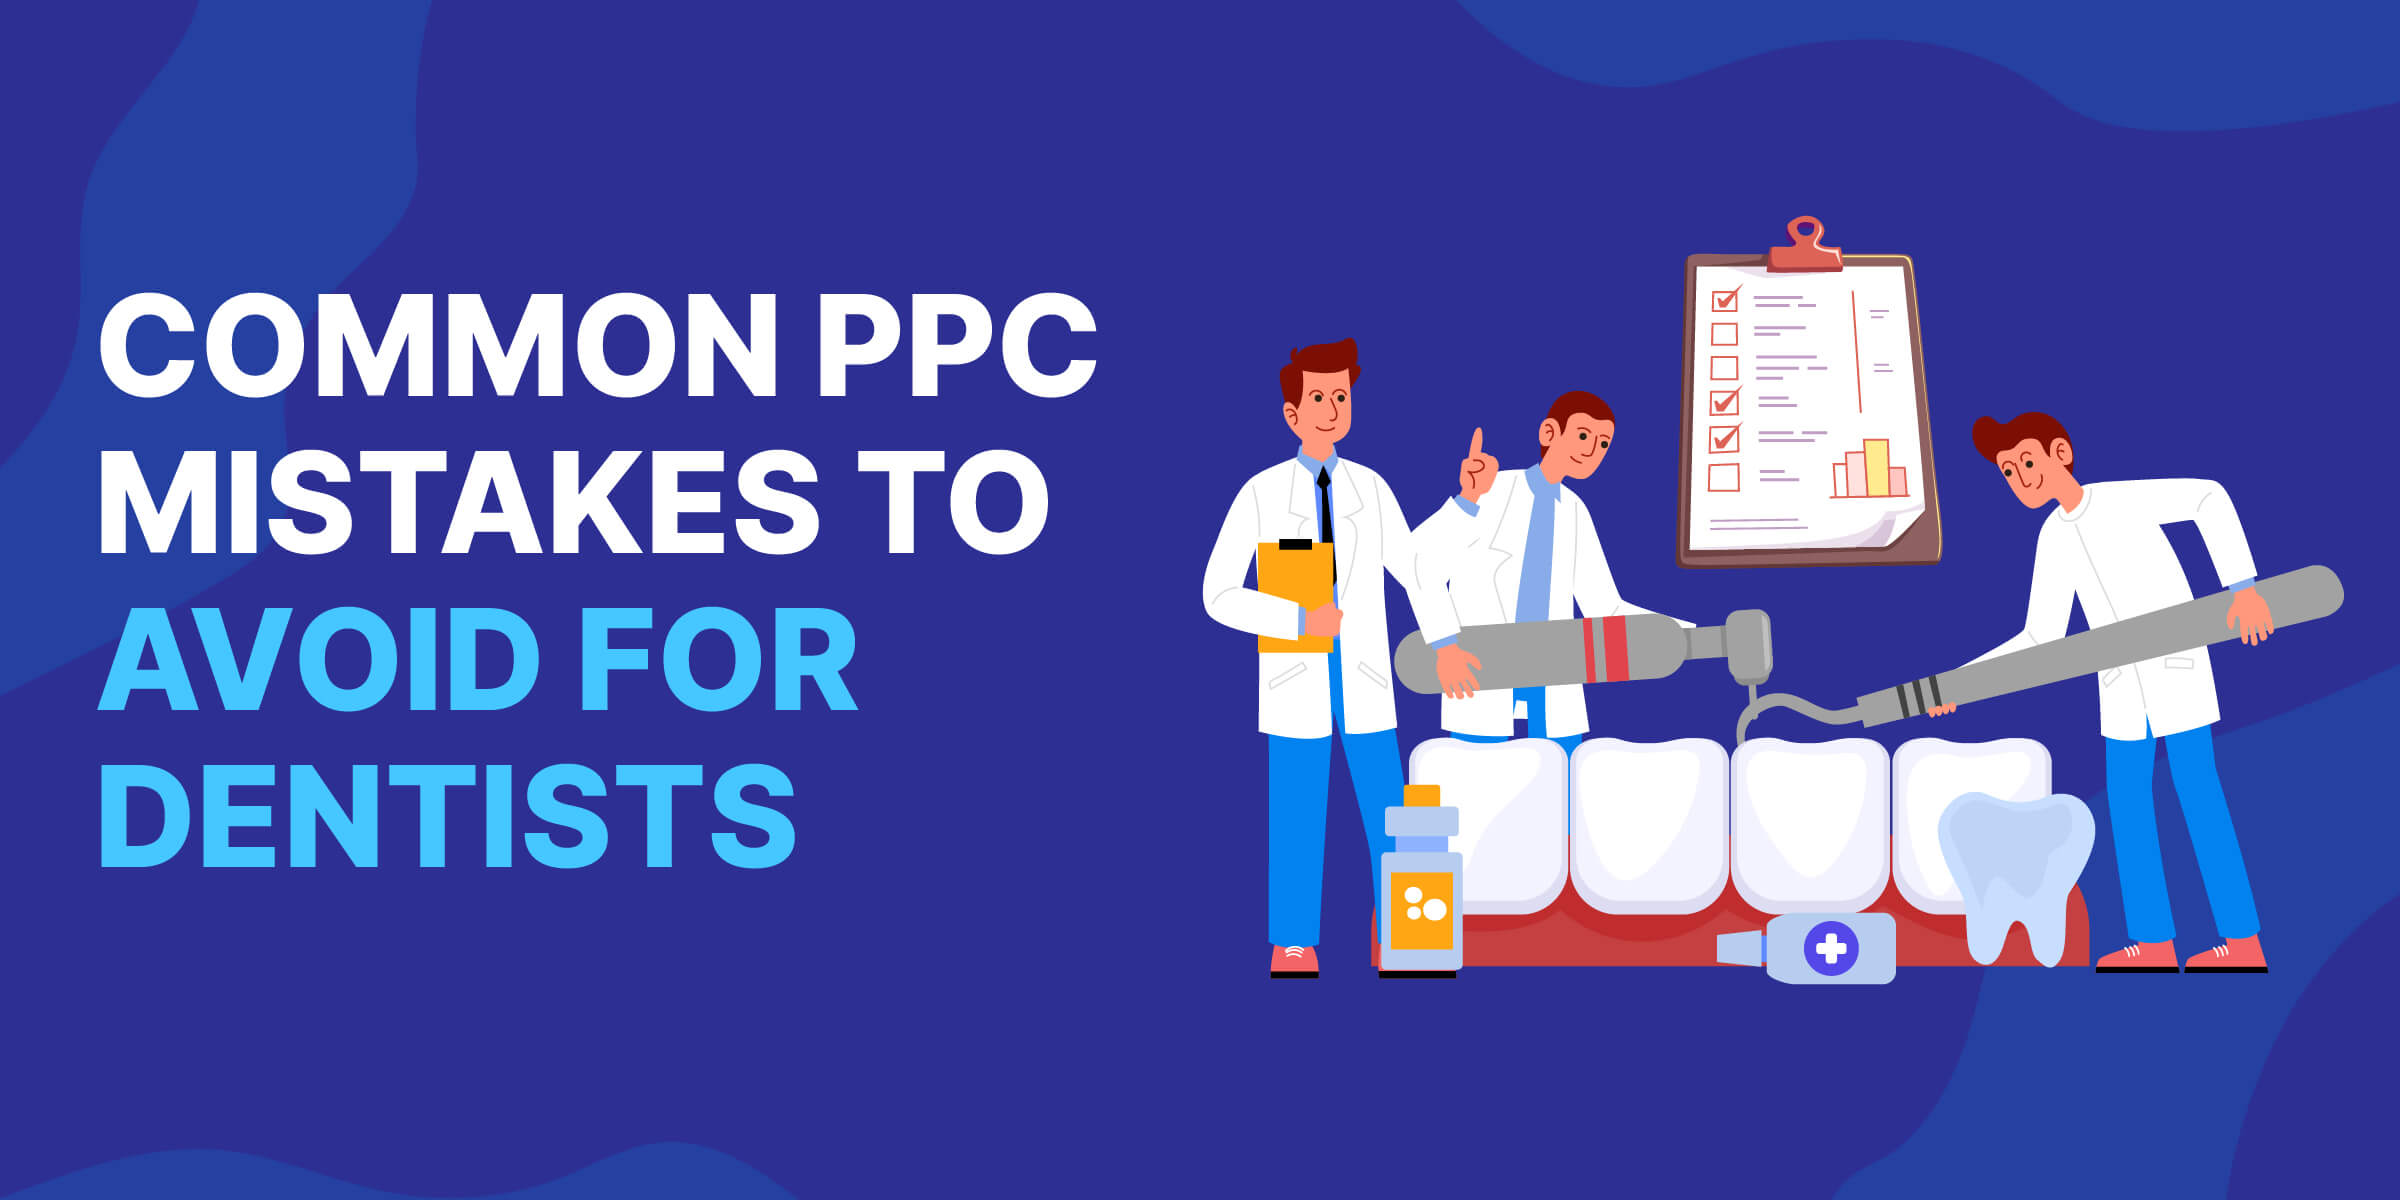 Common PPC Mistakes to Avoid for Dentists